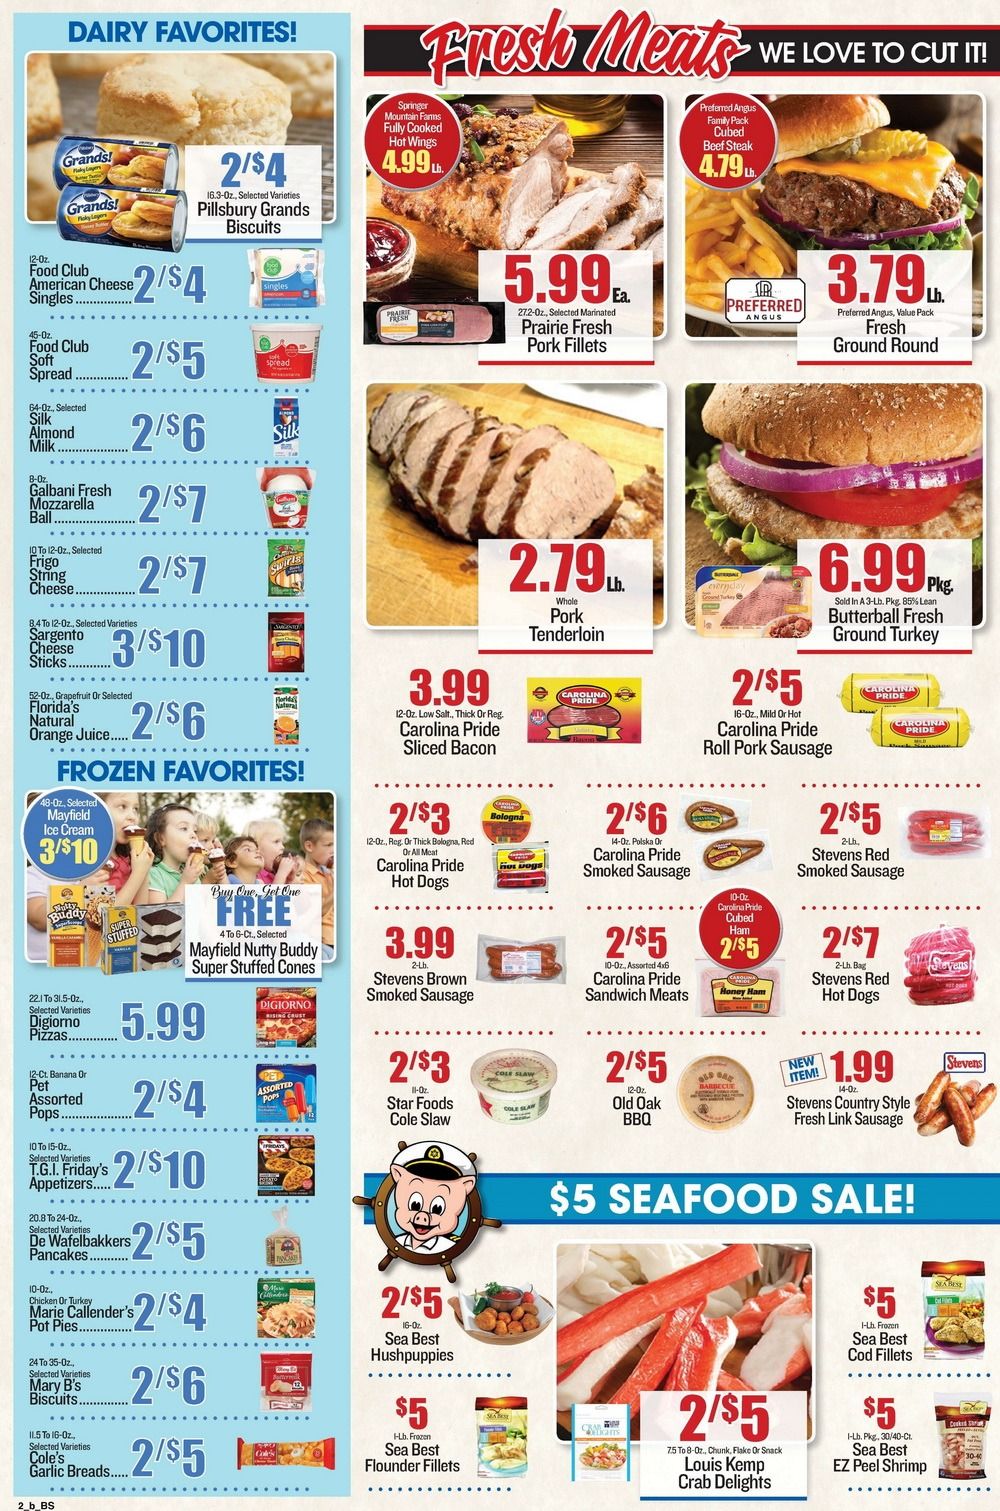 Piggly Wiggly Weekly Ad Aug 12 – Aug 18, 2020